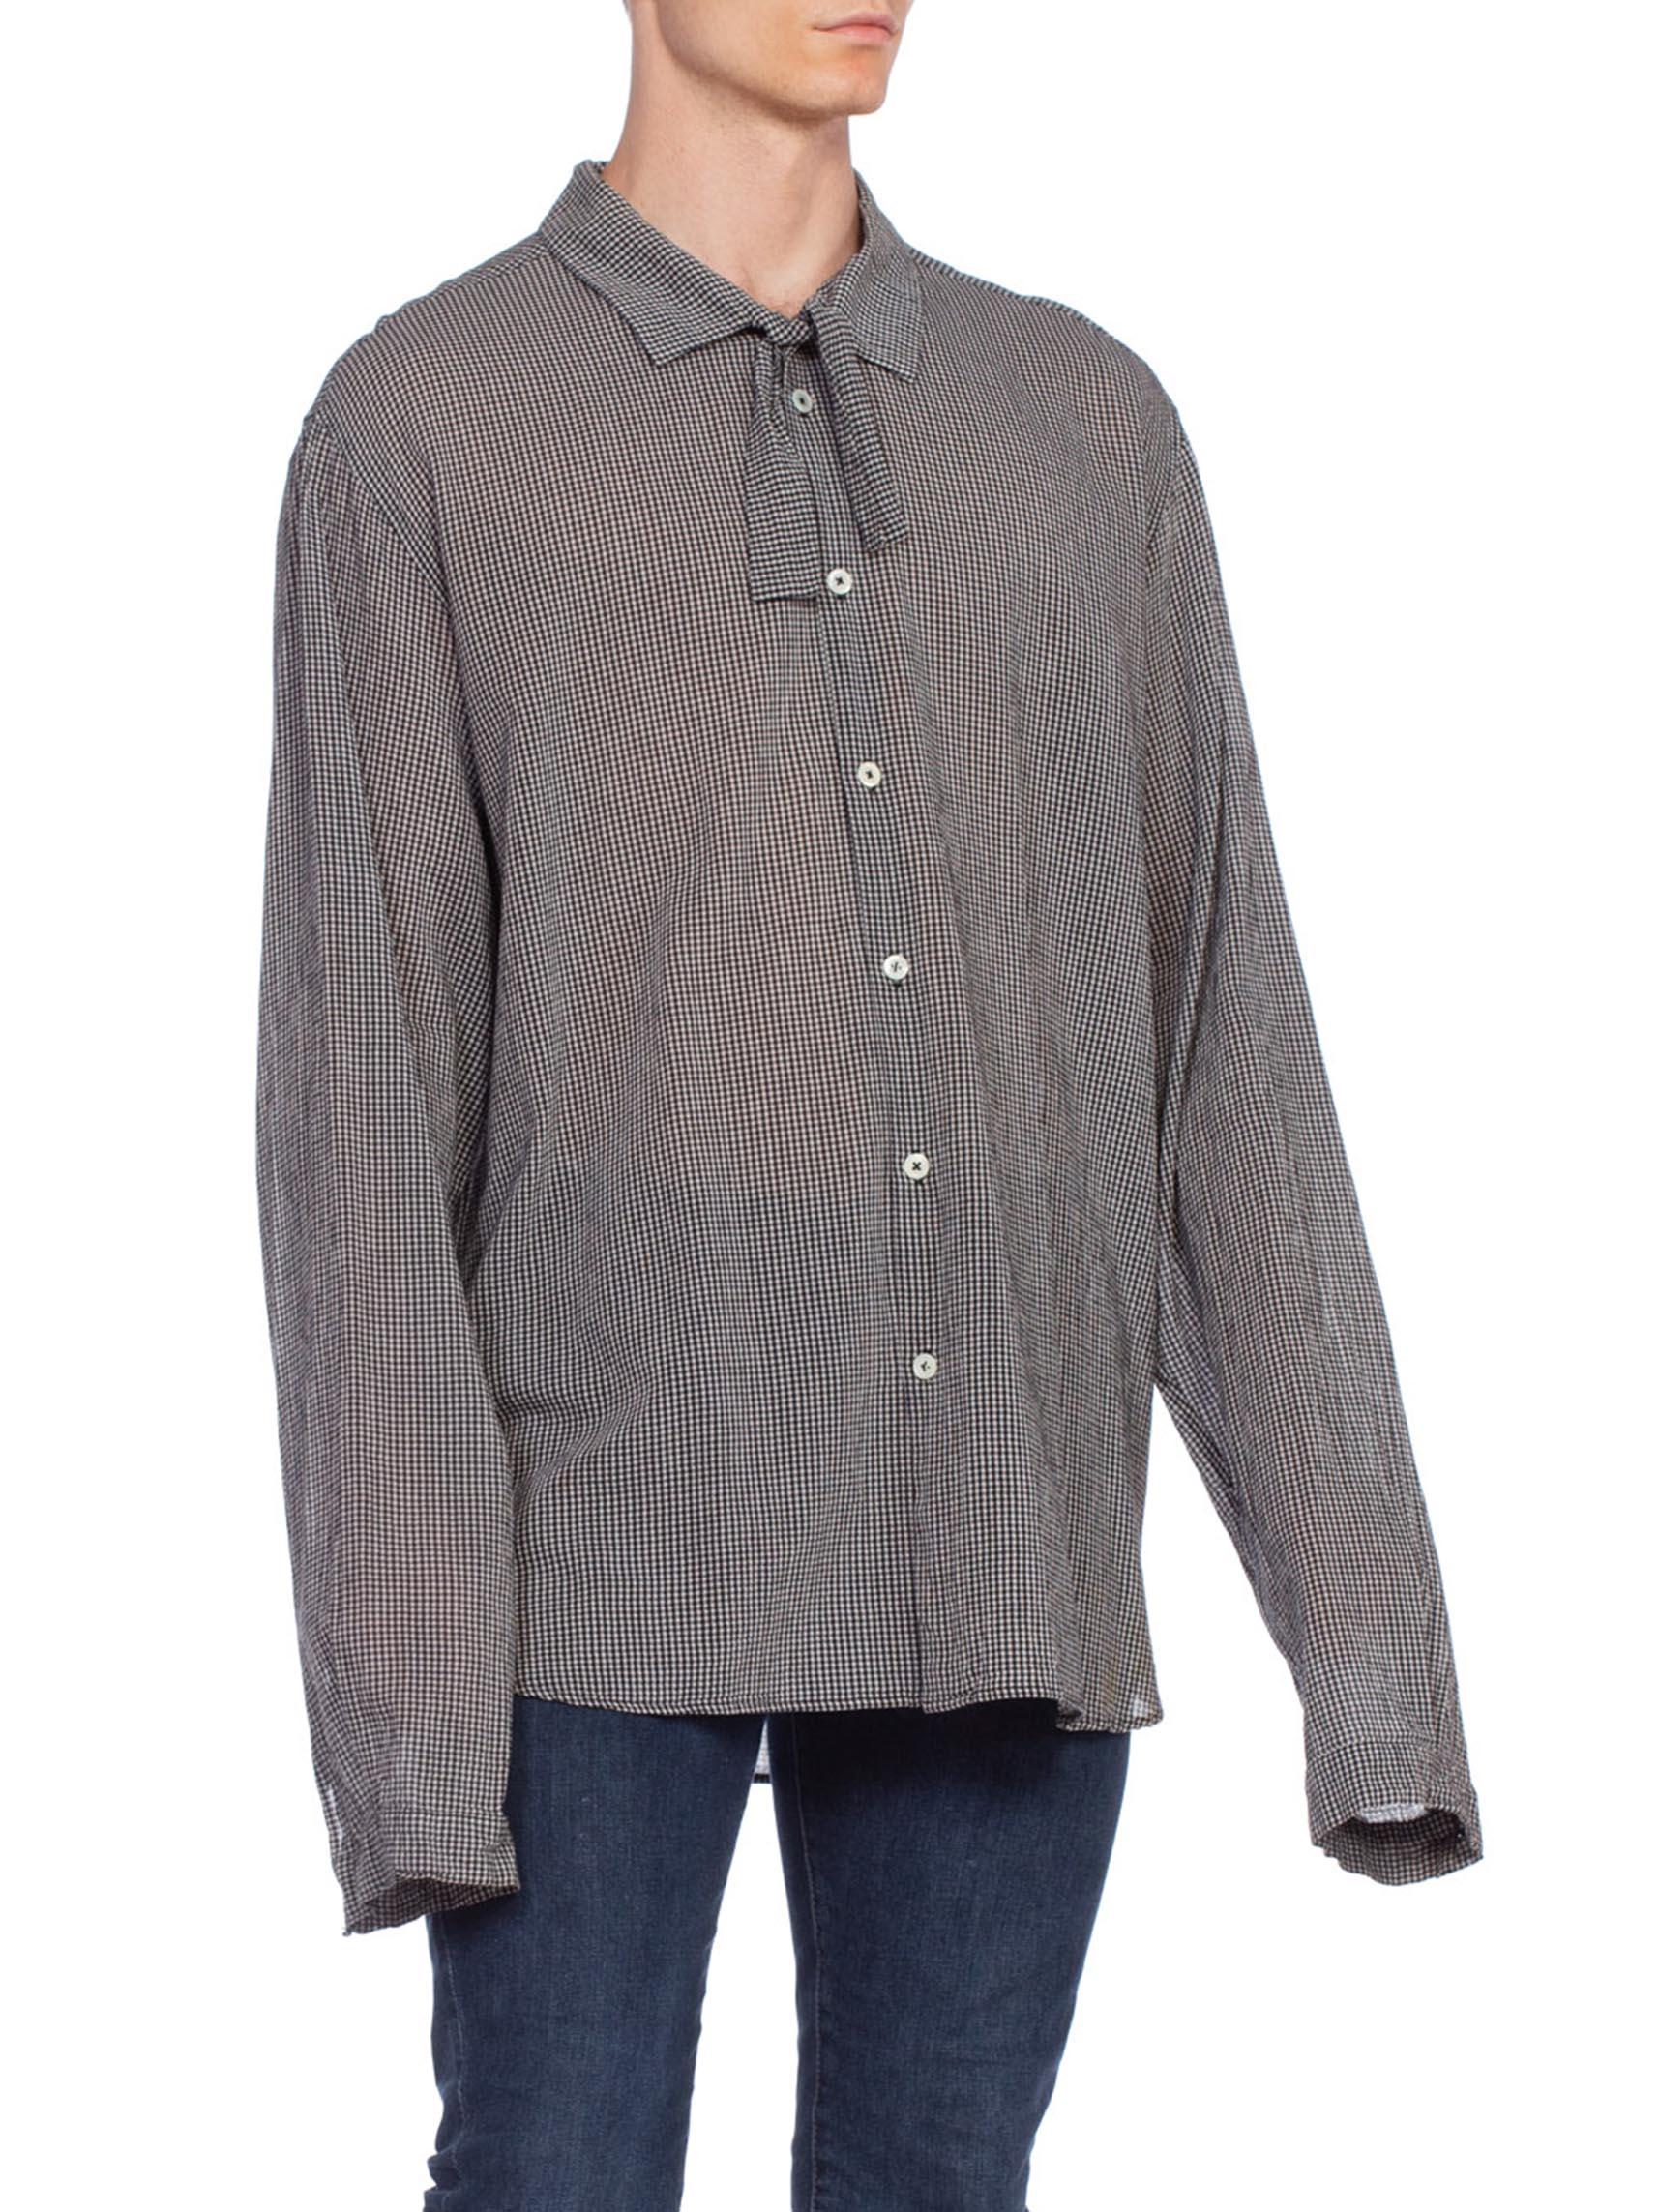 2000S ANN DEMEULEMEESTER Rayon Crepe Men's Oversized Bow Neck Shirt For Sale 6